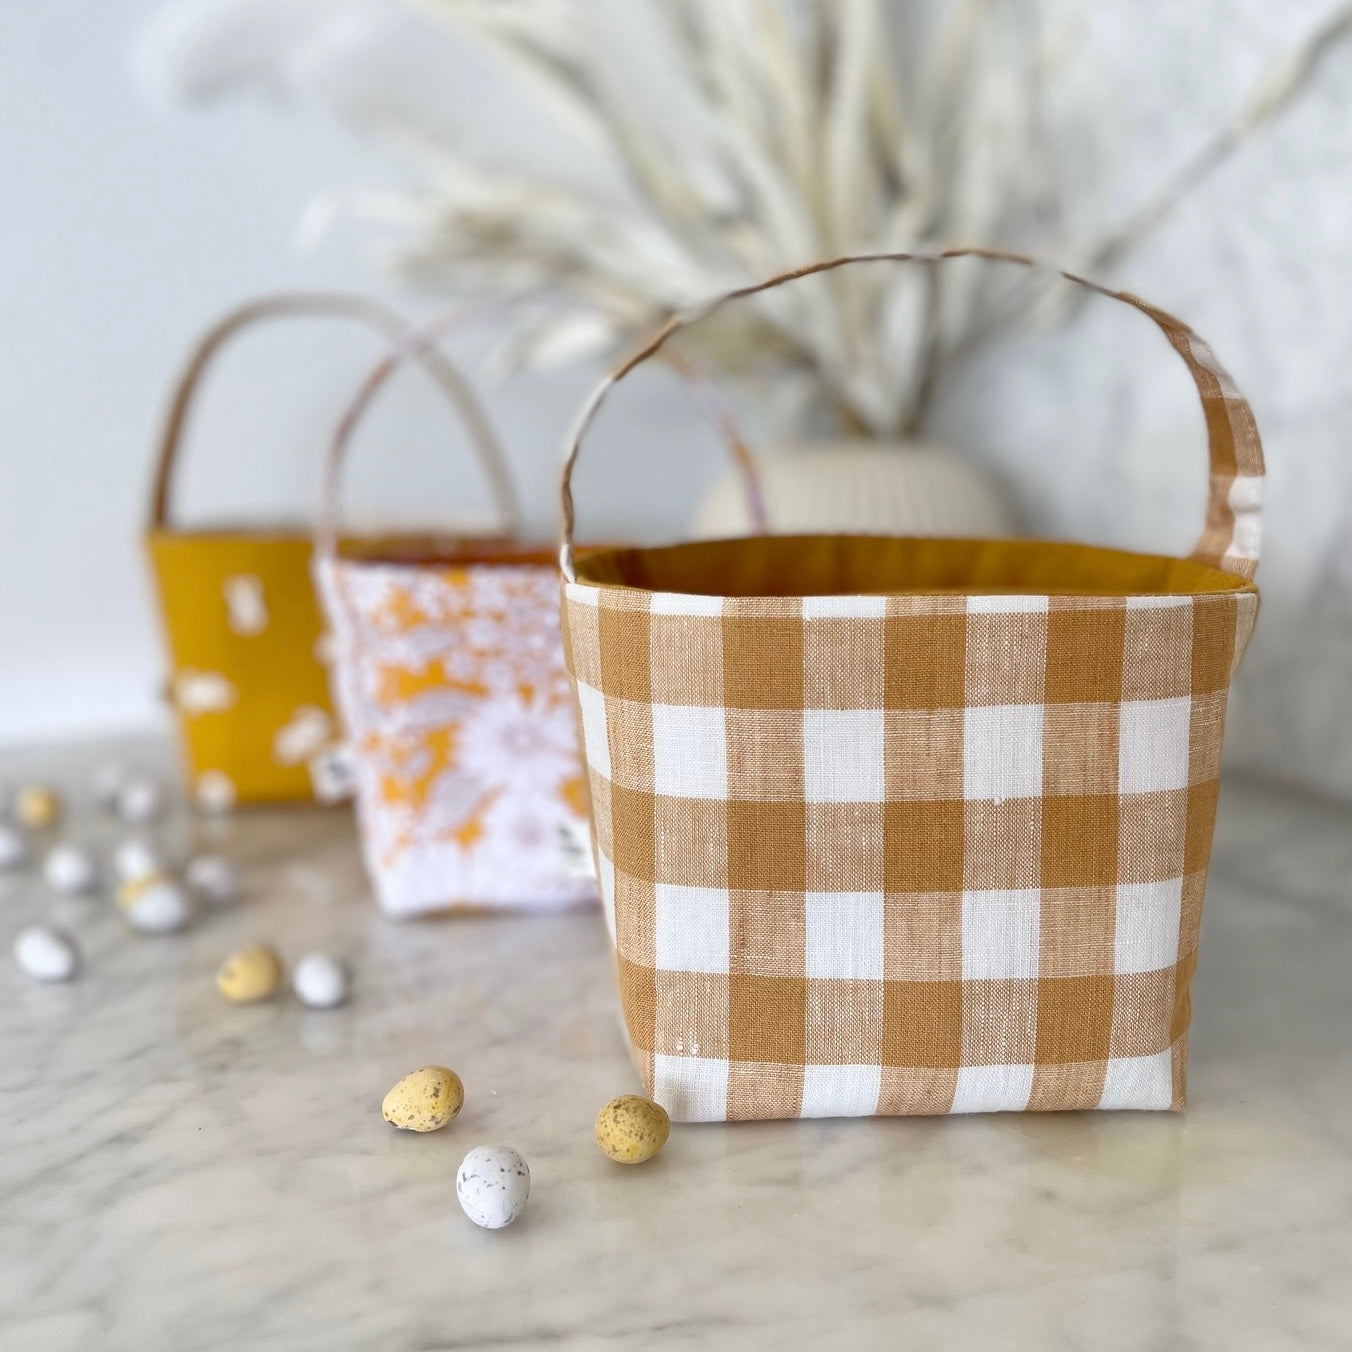 Easter Fabric Baskets - Bunnies, Sunflowers and Gingham